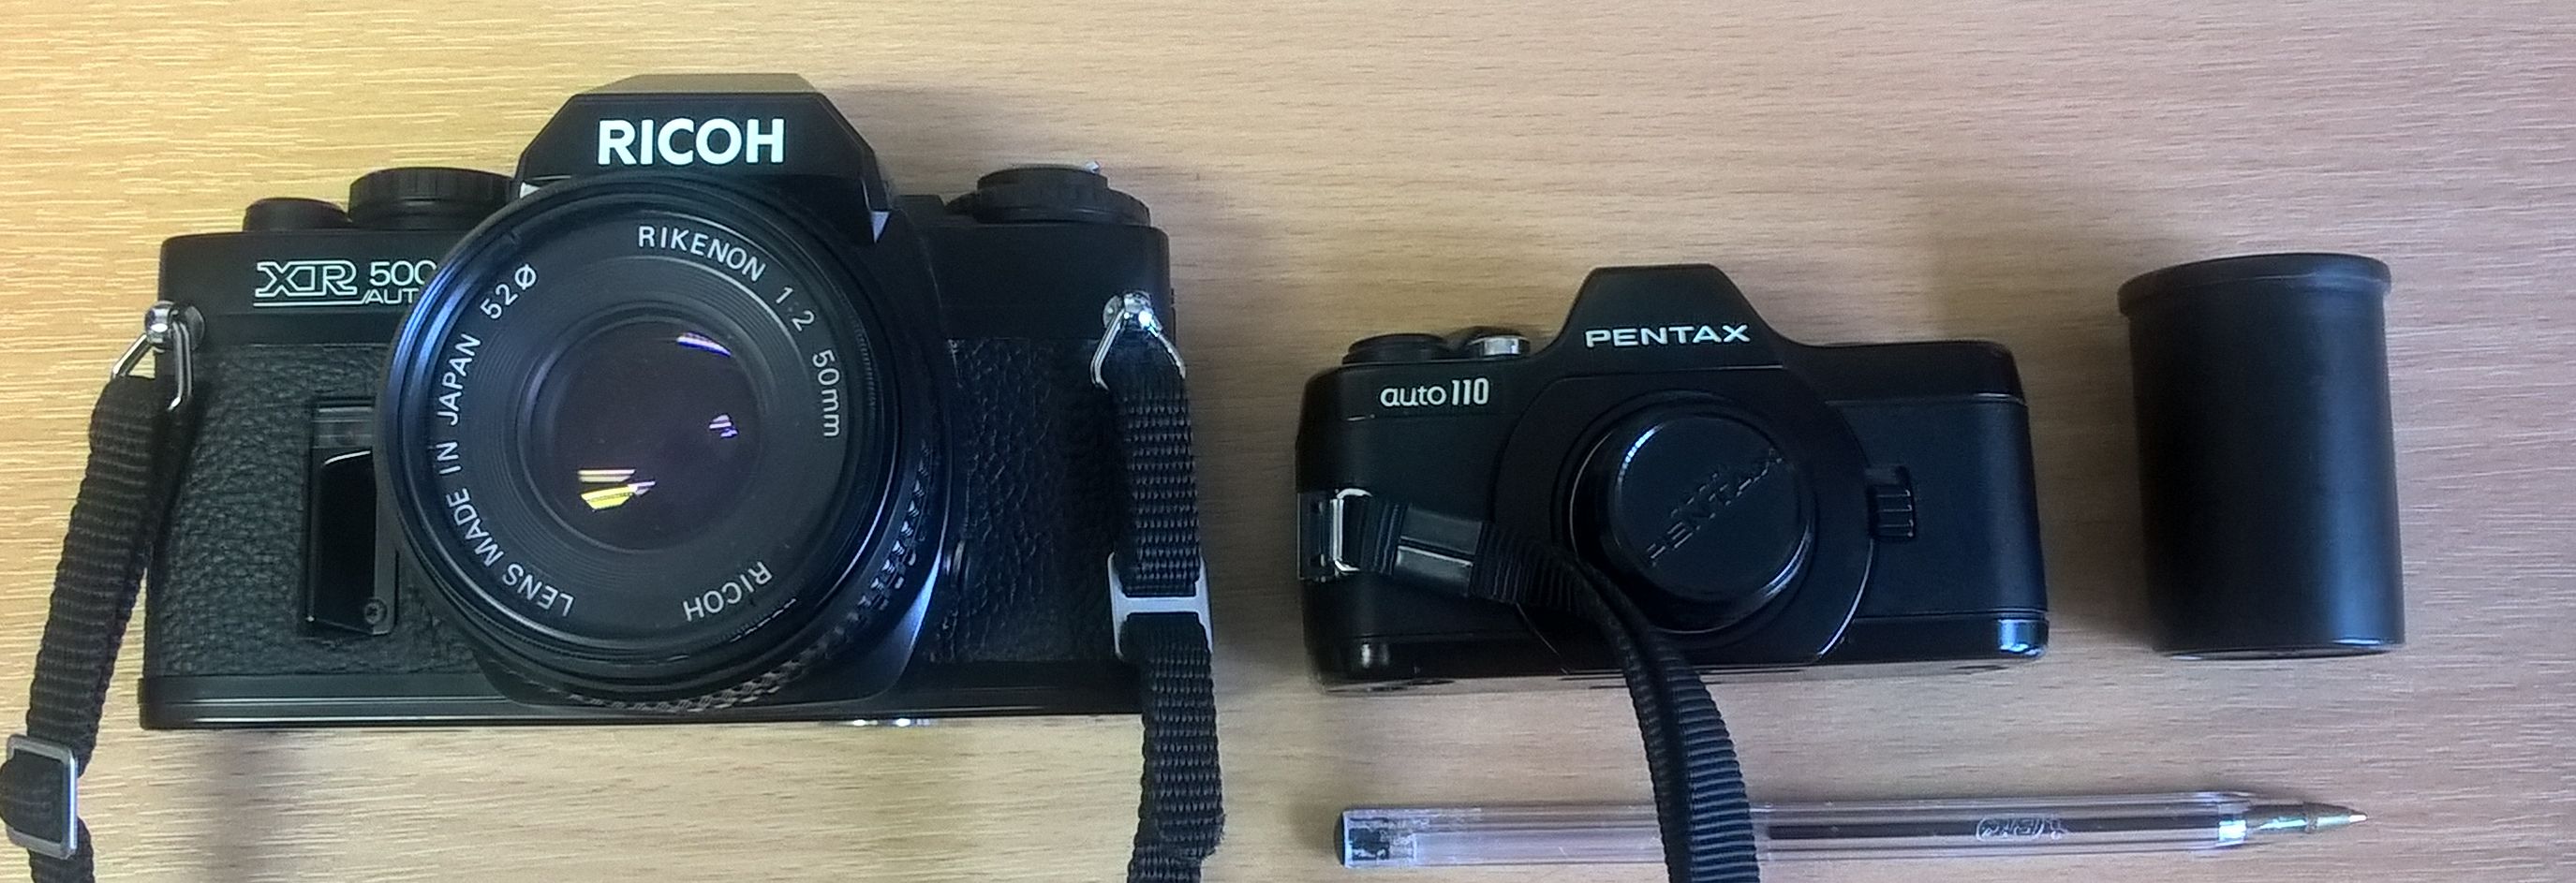 Pentax Auto 110 SLR in comparison with a Ricoh 35mm SLR